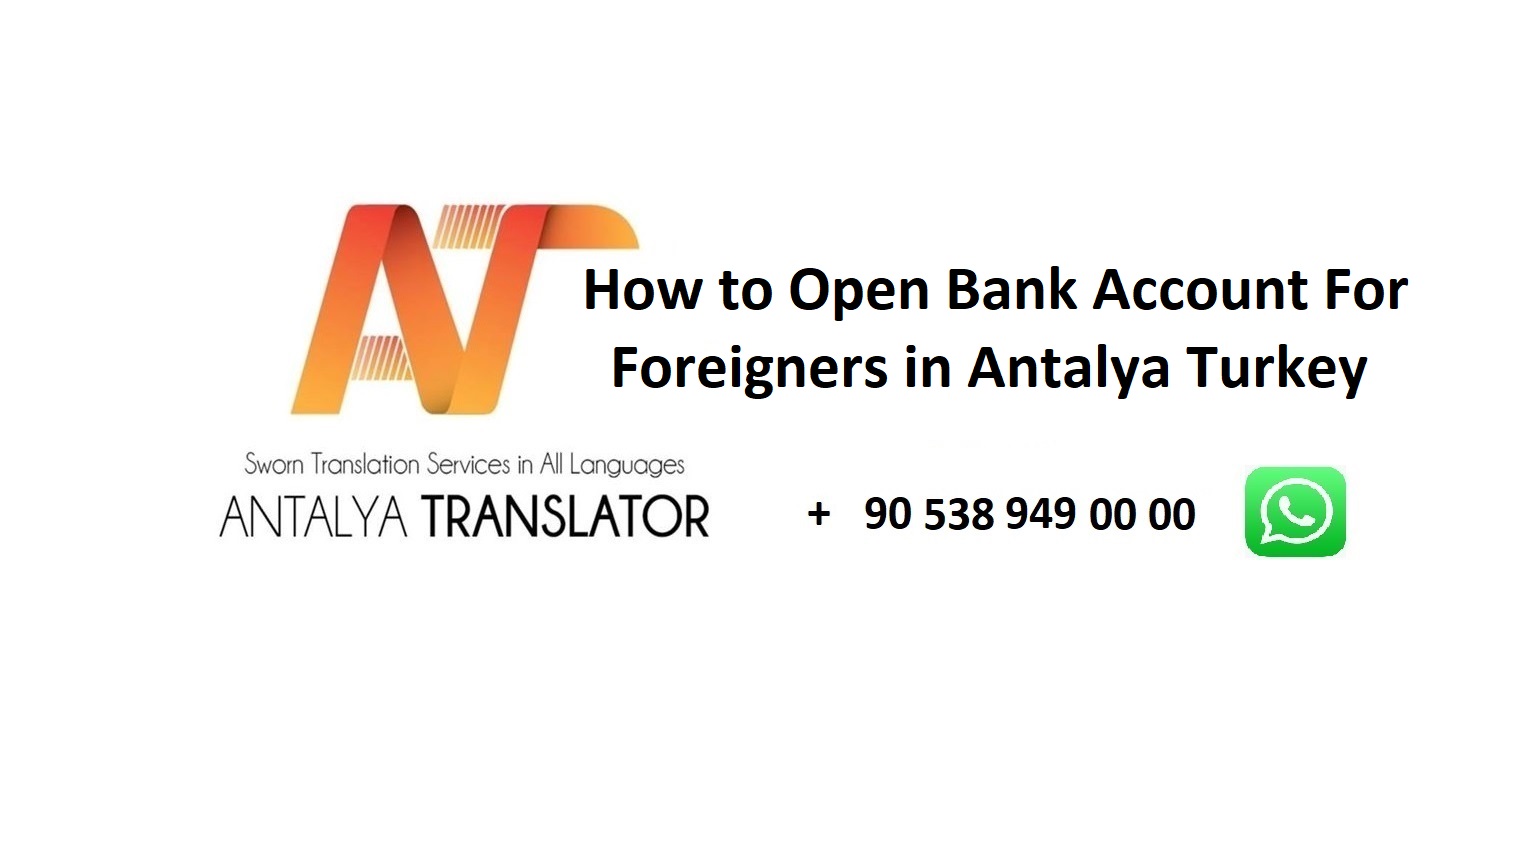 How to Open Bank Account For Foreigners in Antalya Turkey